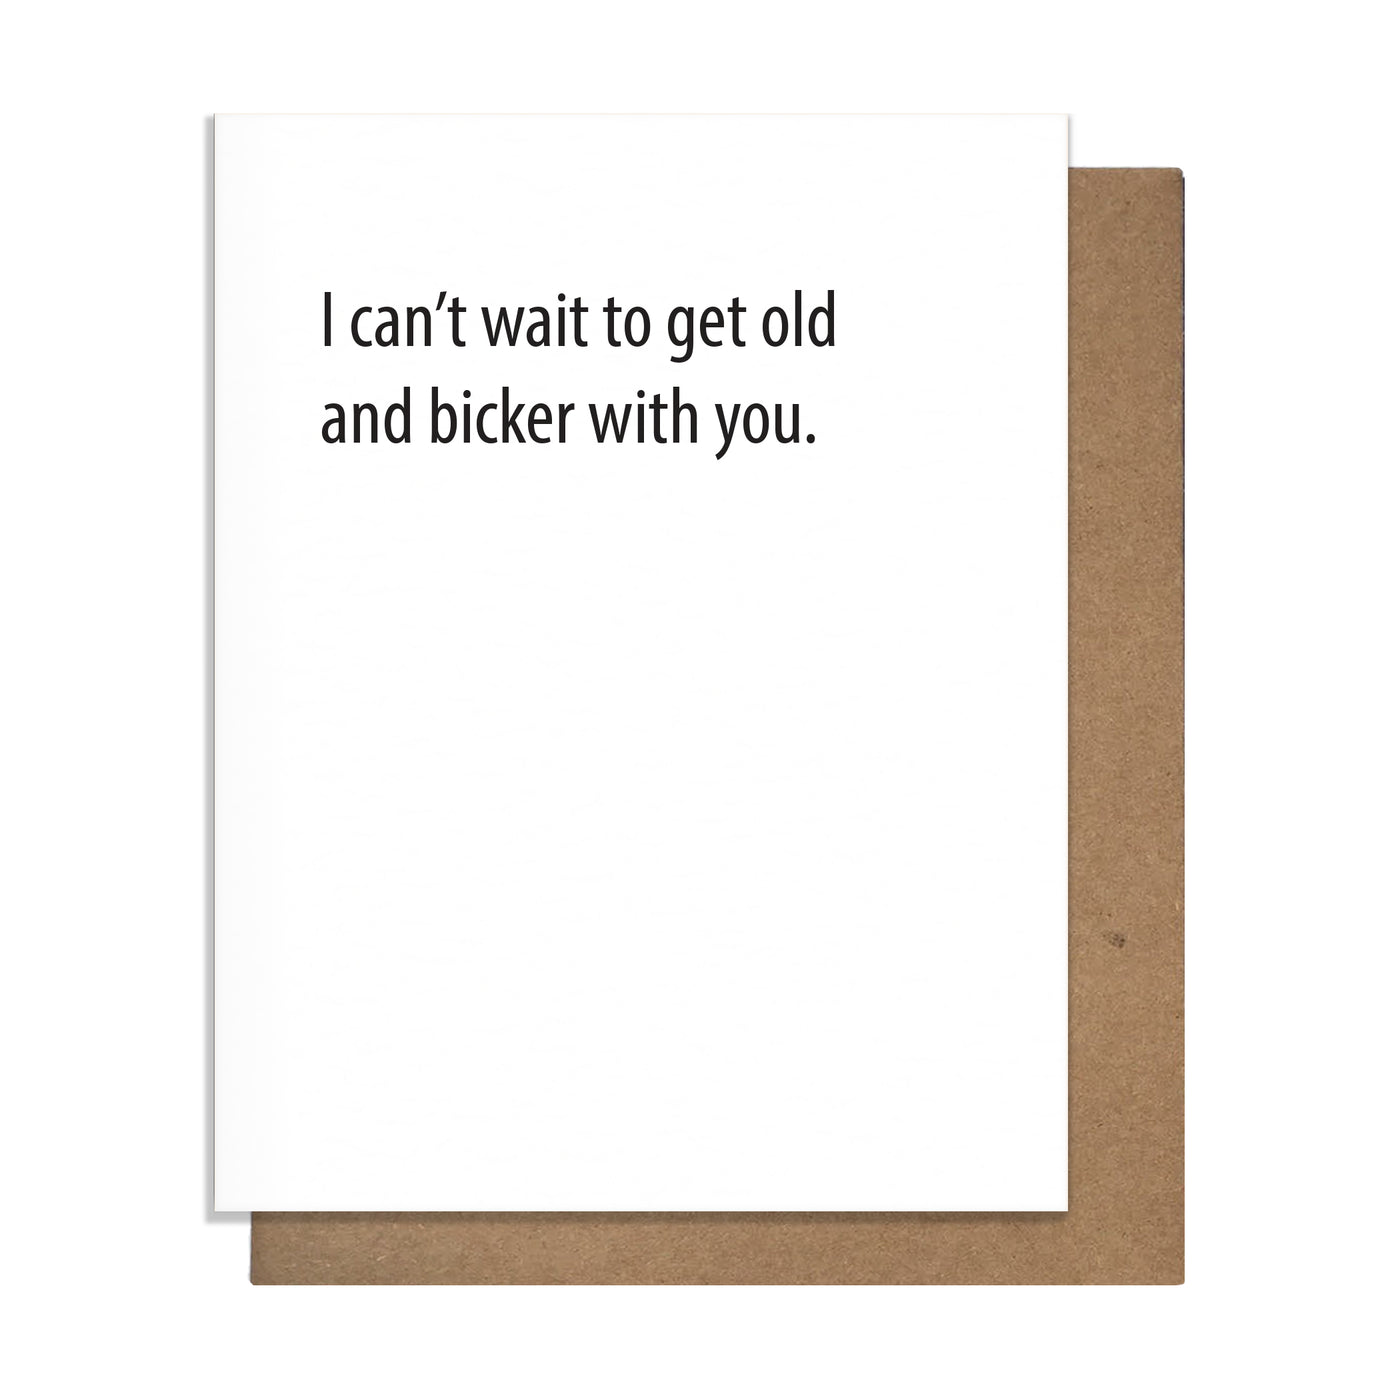 Bicker Card, Greeting Card, love quotes